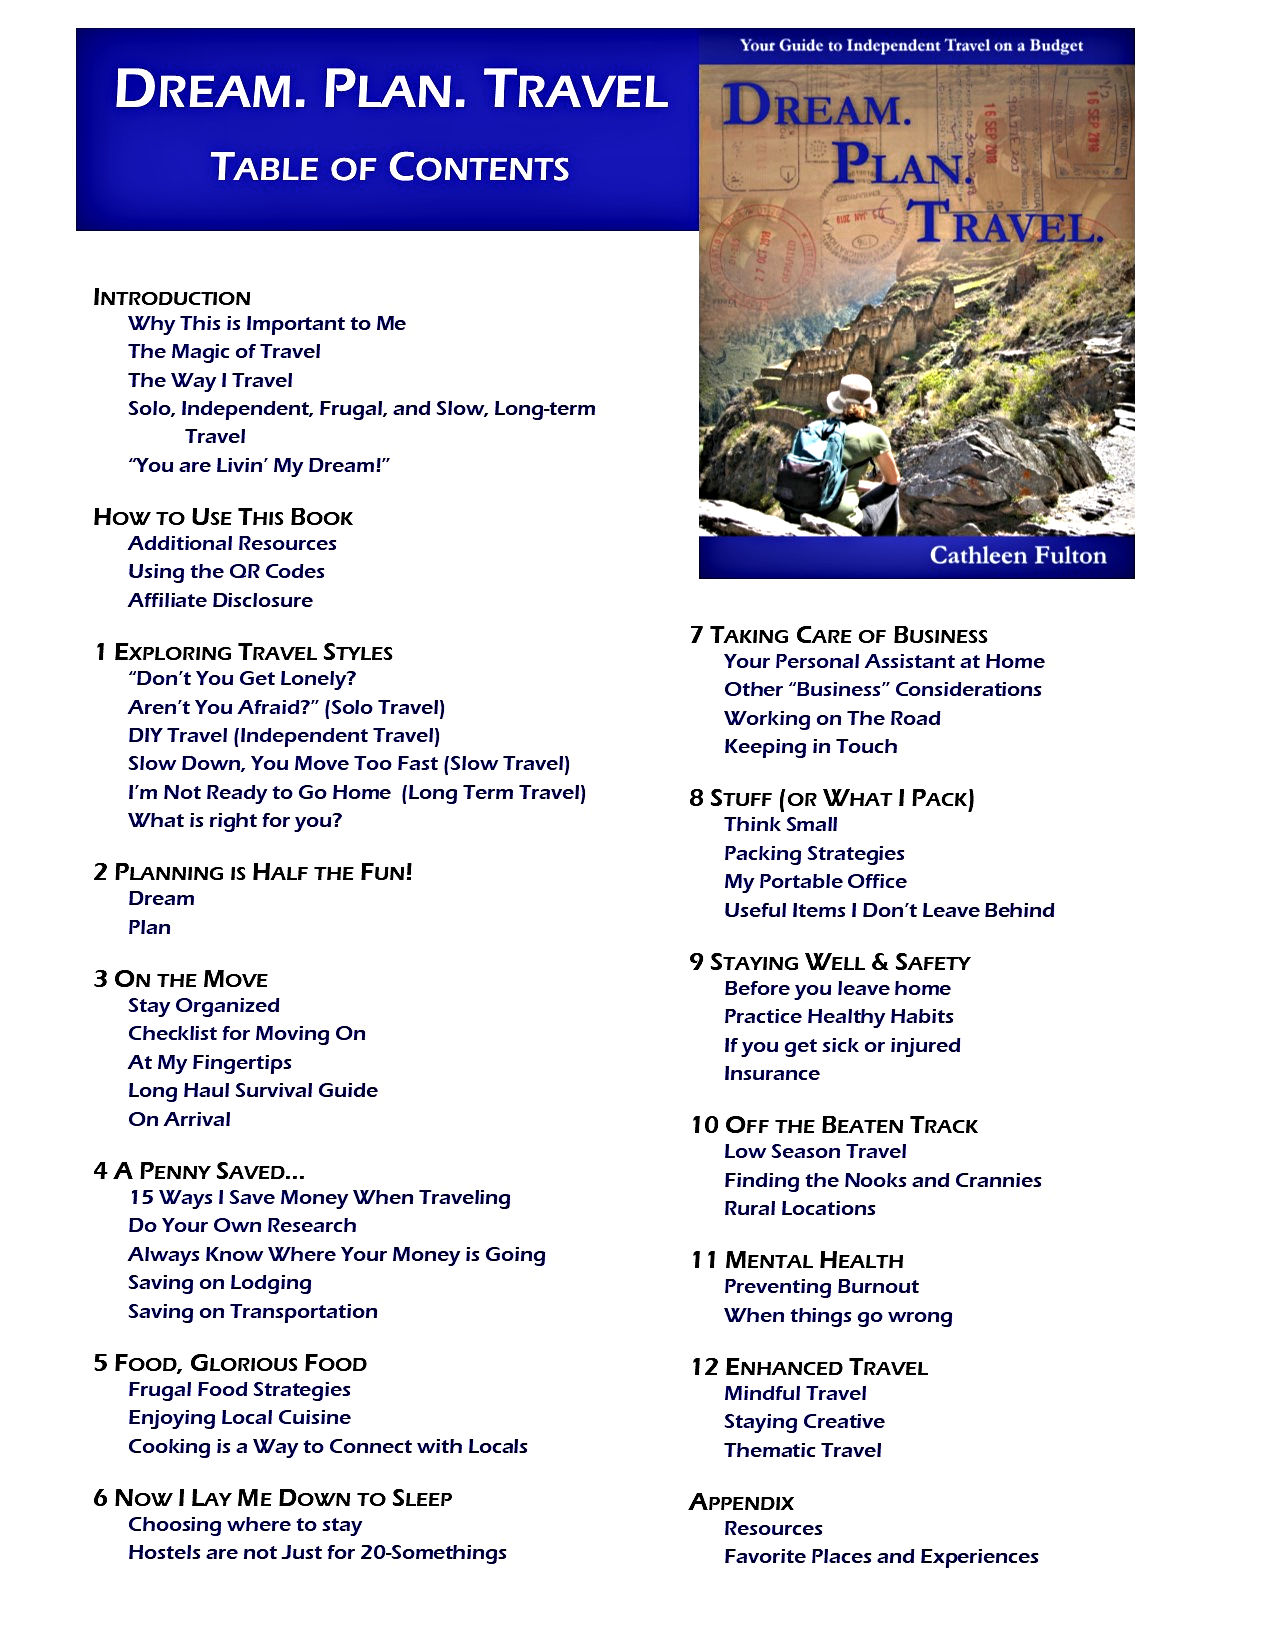 Table of Contents for Dream. Plan. Travel.